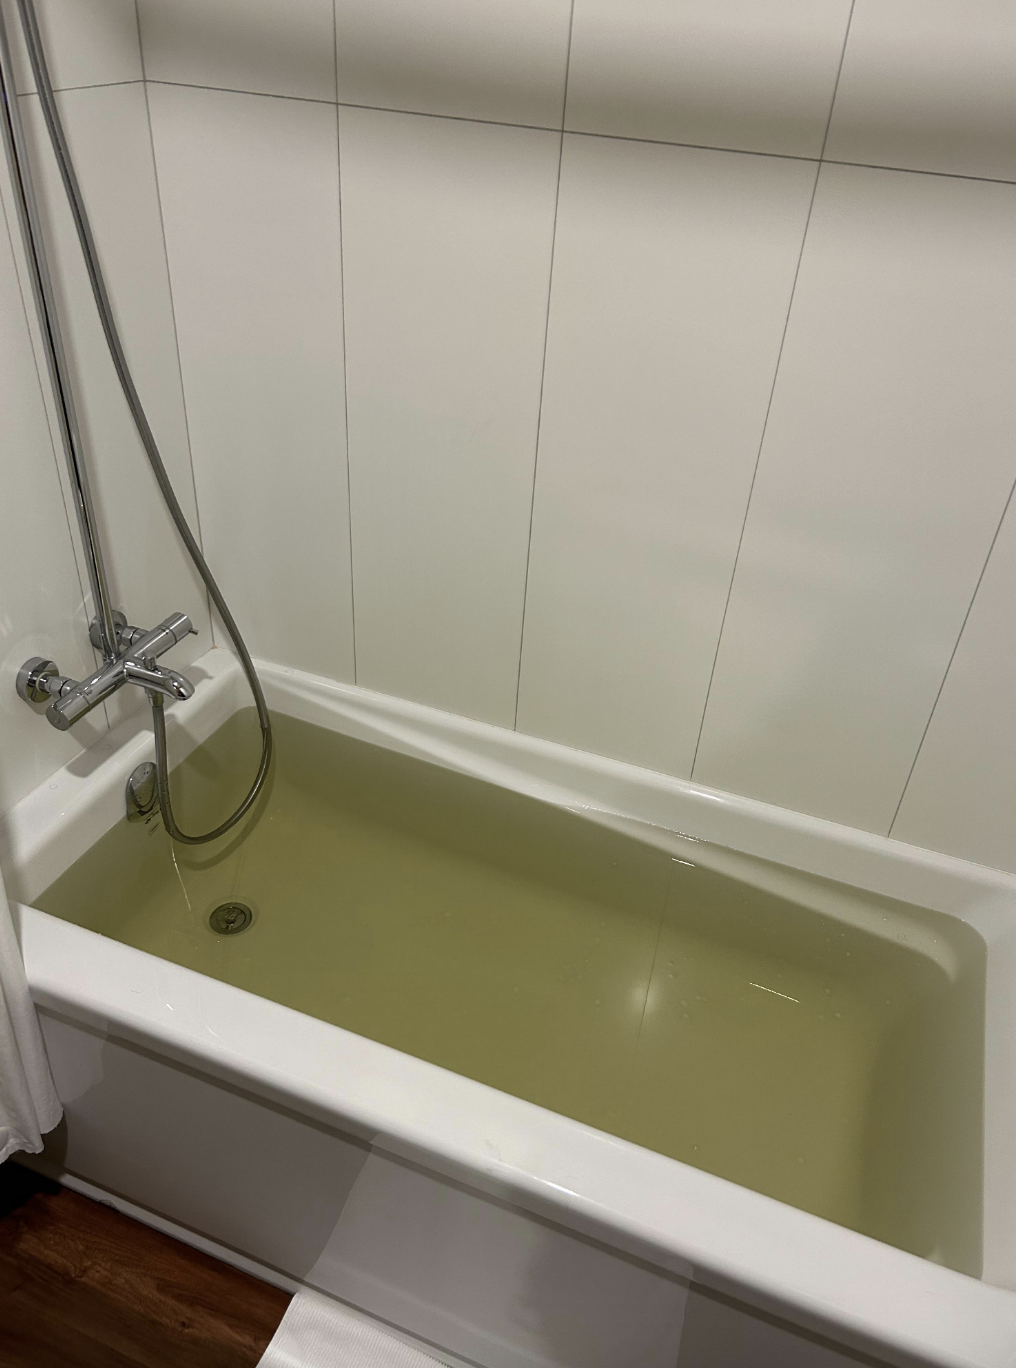 A bathtub filled with water, showing an attached showerhead to the right